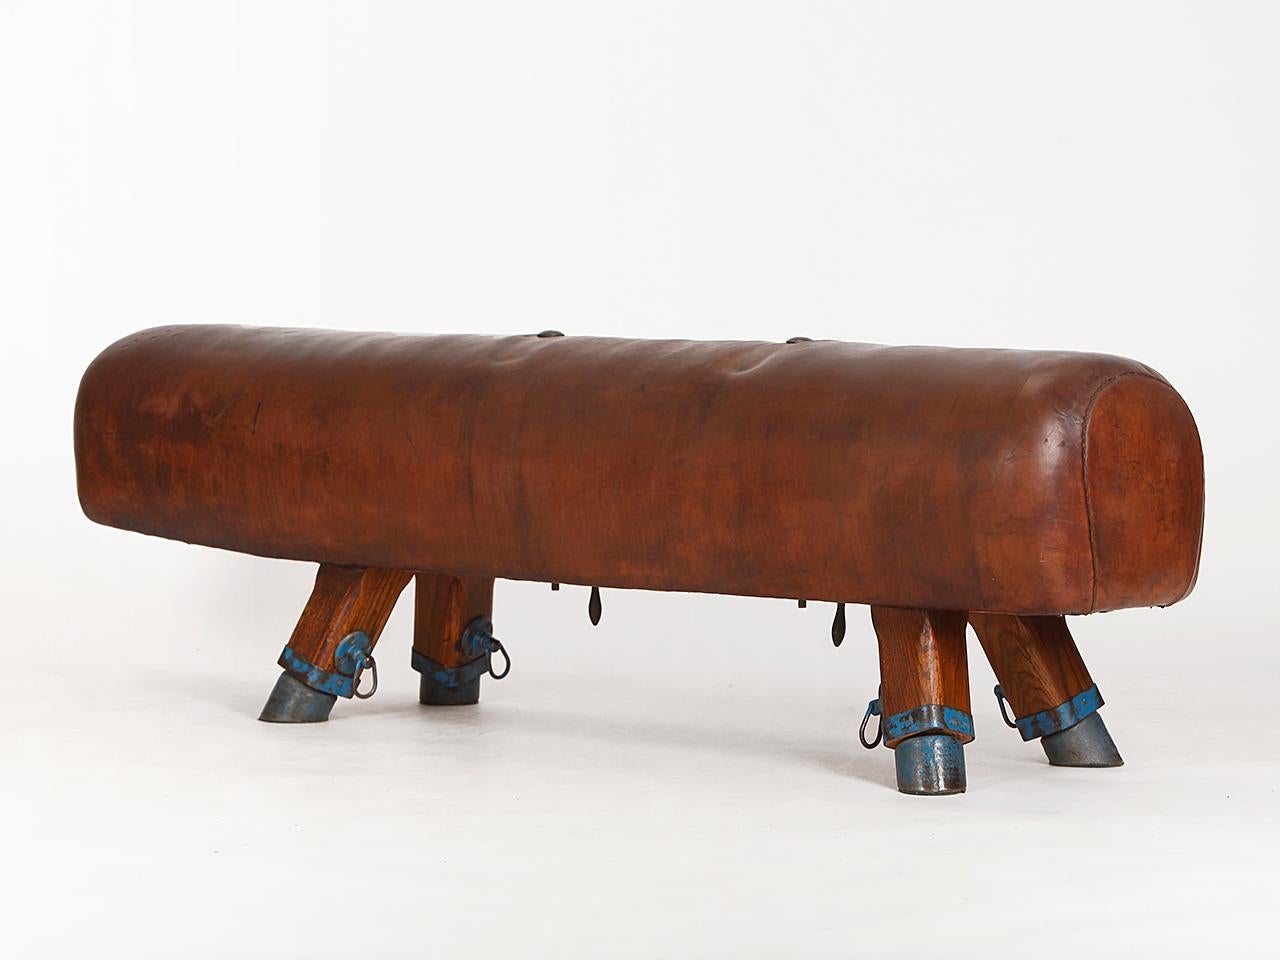 Produced in the early 20th century, former Czechoslovakia. The legs of this pommel horse were shortened to a seat height of 56cm. The thick patinated cowhide leather has been cleaned and preserved.